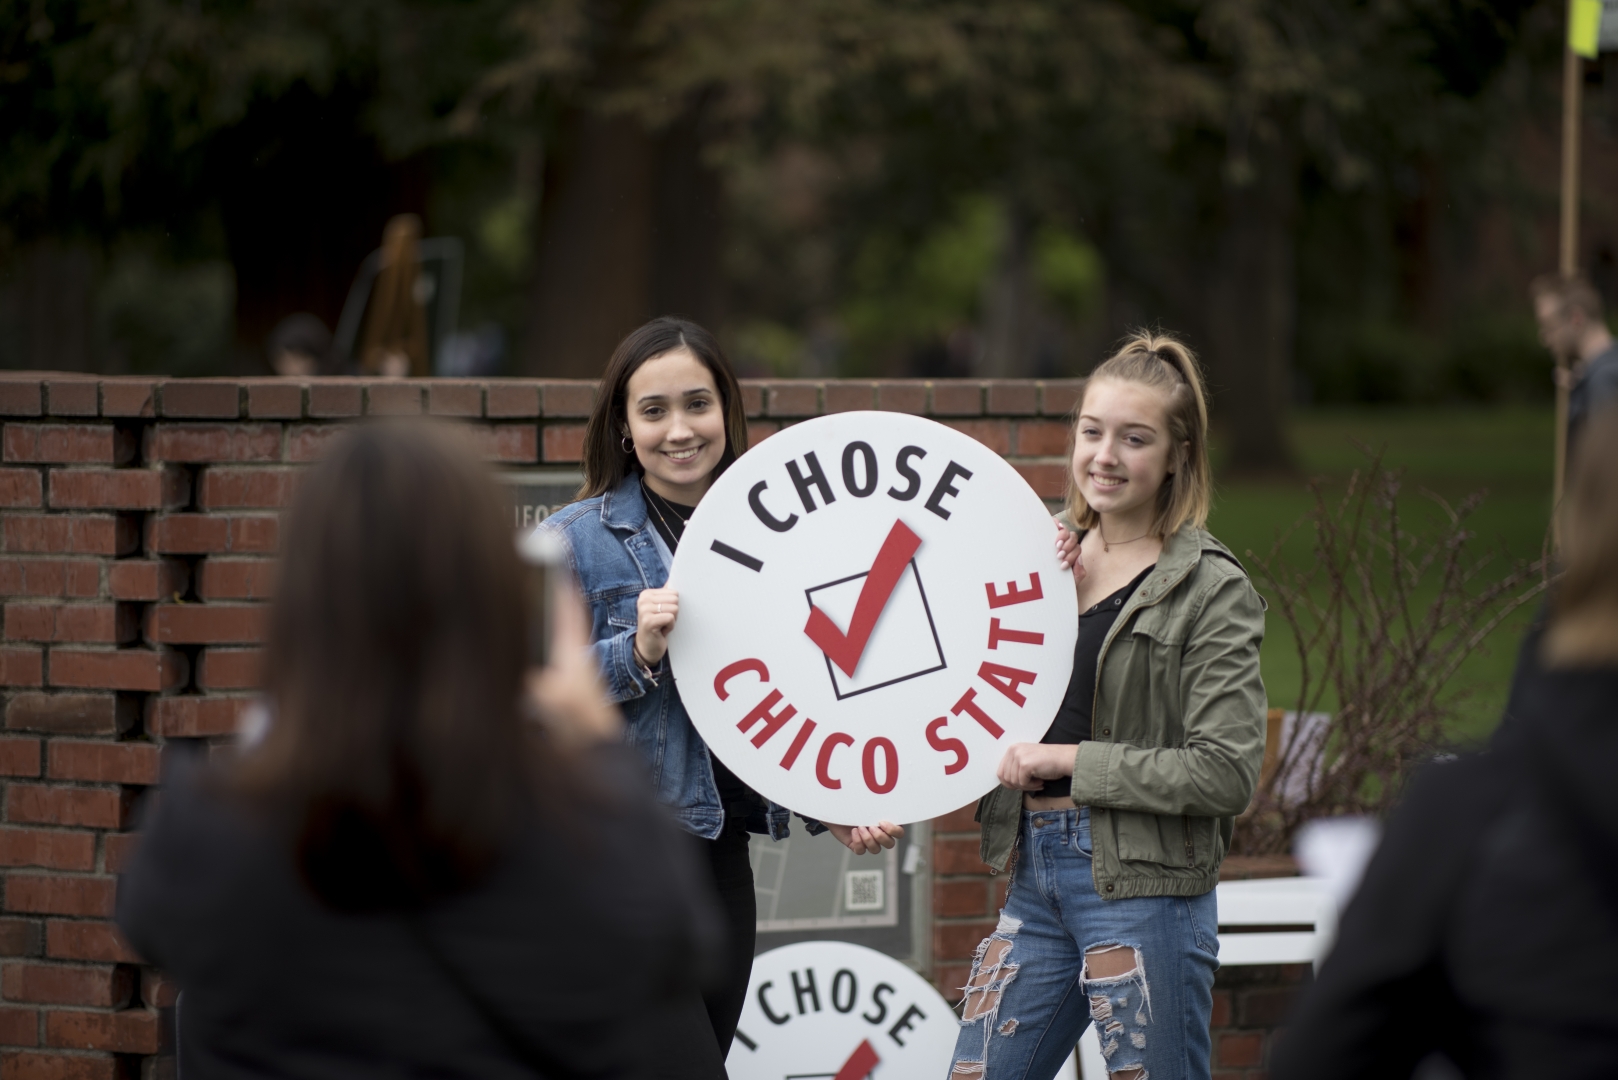 Two students smile and hold a round sign that reads "I chose Chico State" during Choose Chico.